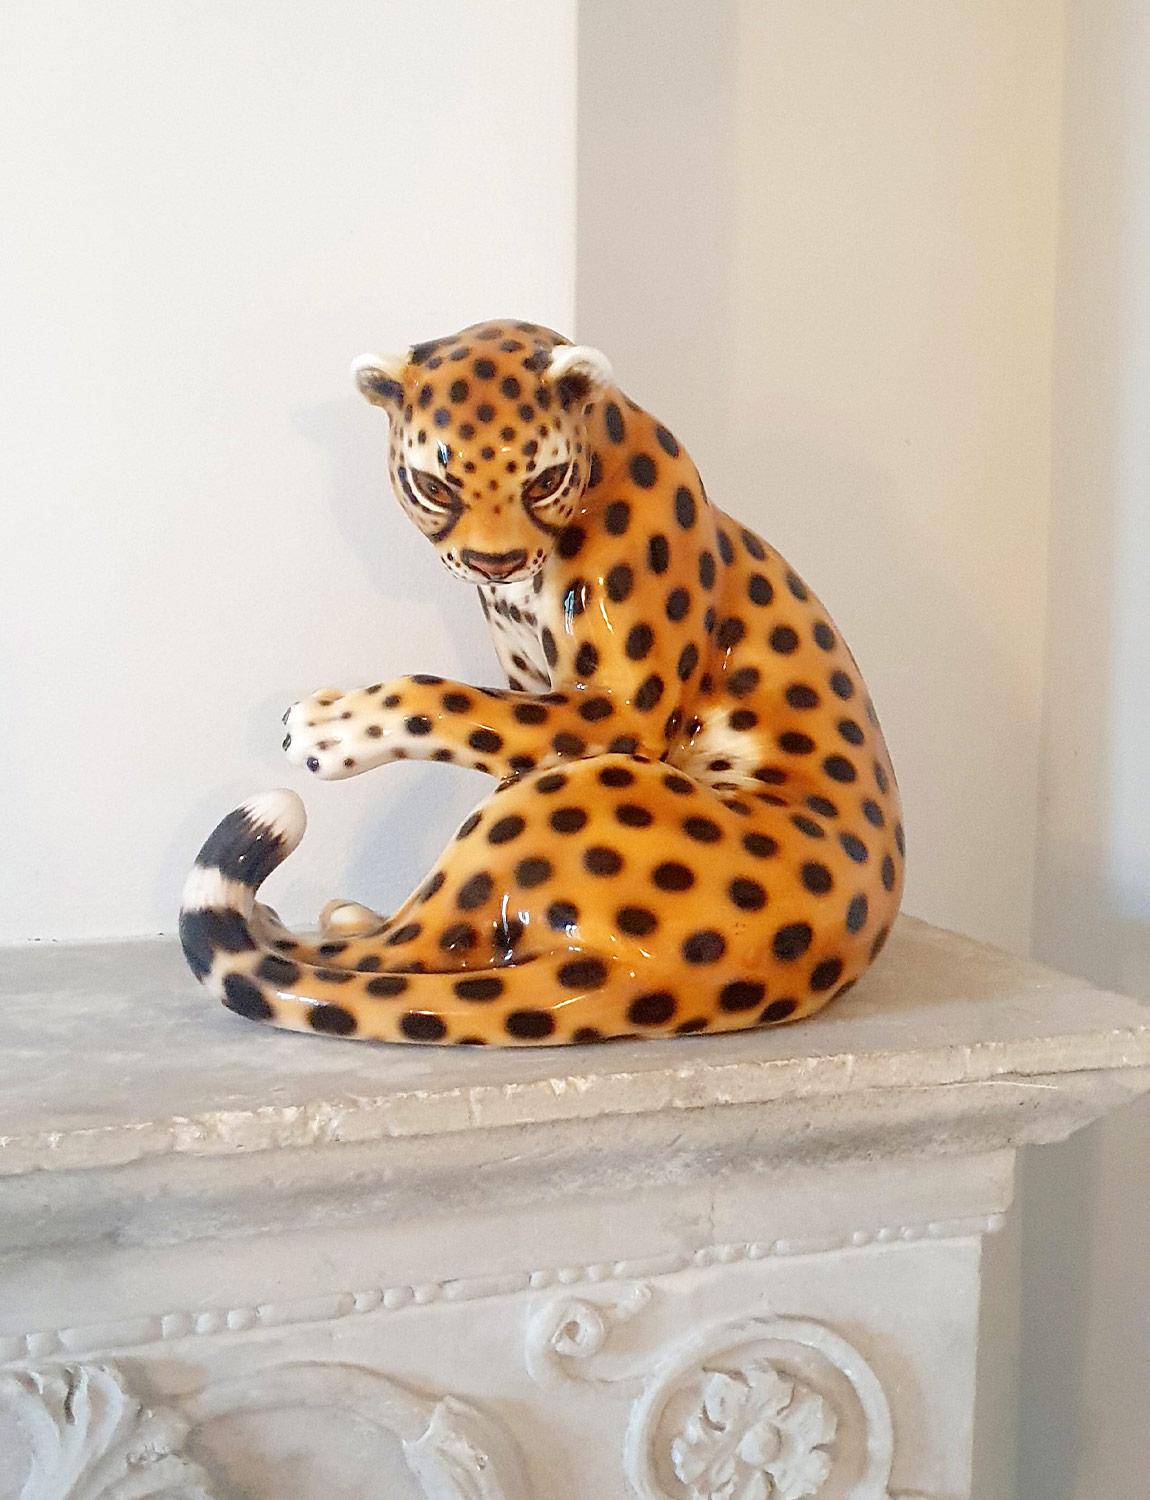 A beautiful (and kitsch) 1970s ceramic leopard found in a private home in Narni, Umbria. One careful owner has carefully preserved this very pretty piece. Ceramic wild animals and dogs were very fashionable in Italian homes in the 1960s and 70s.